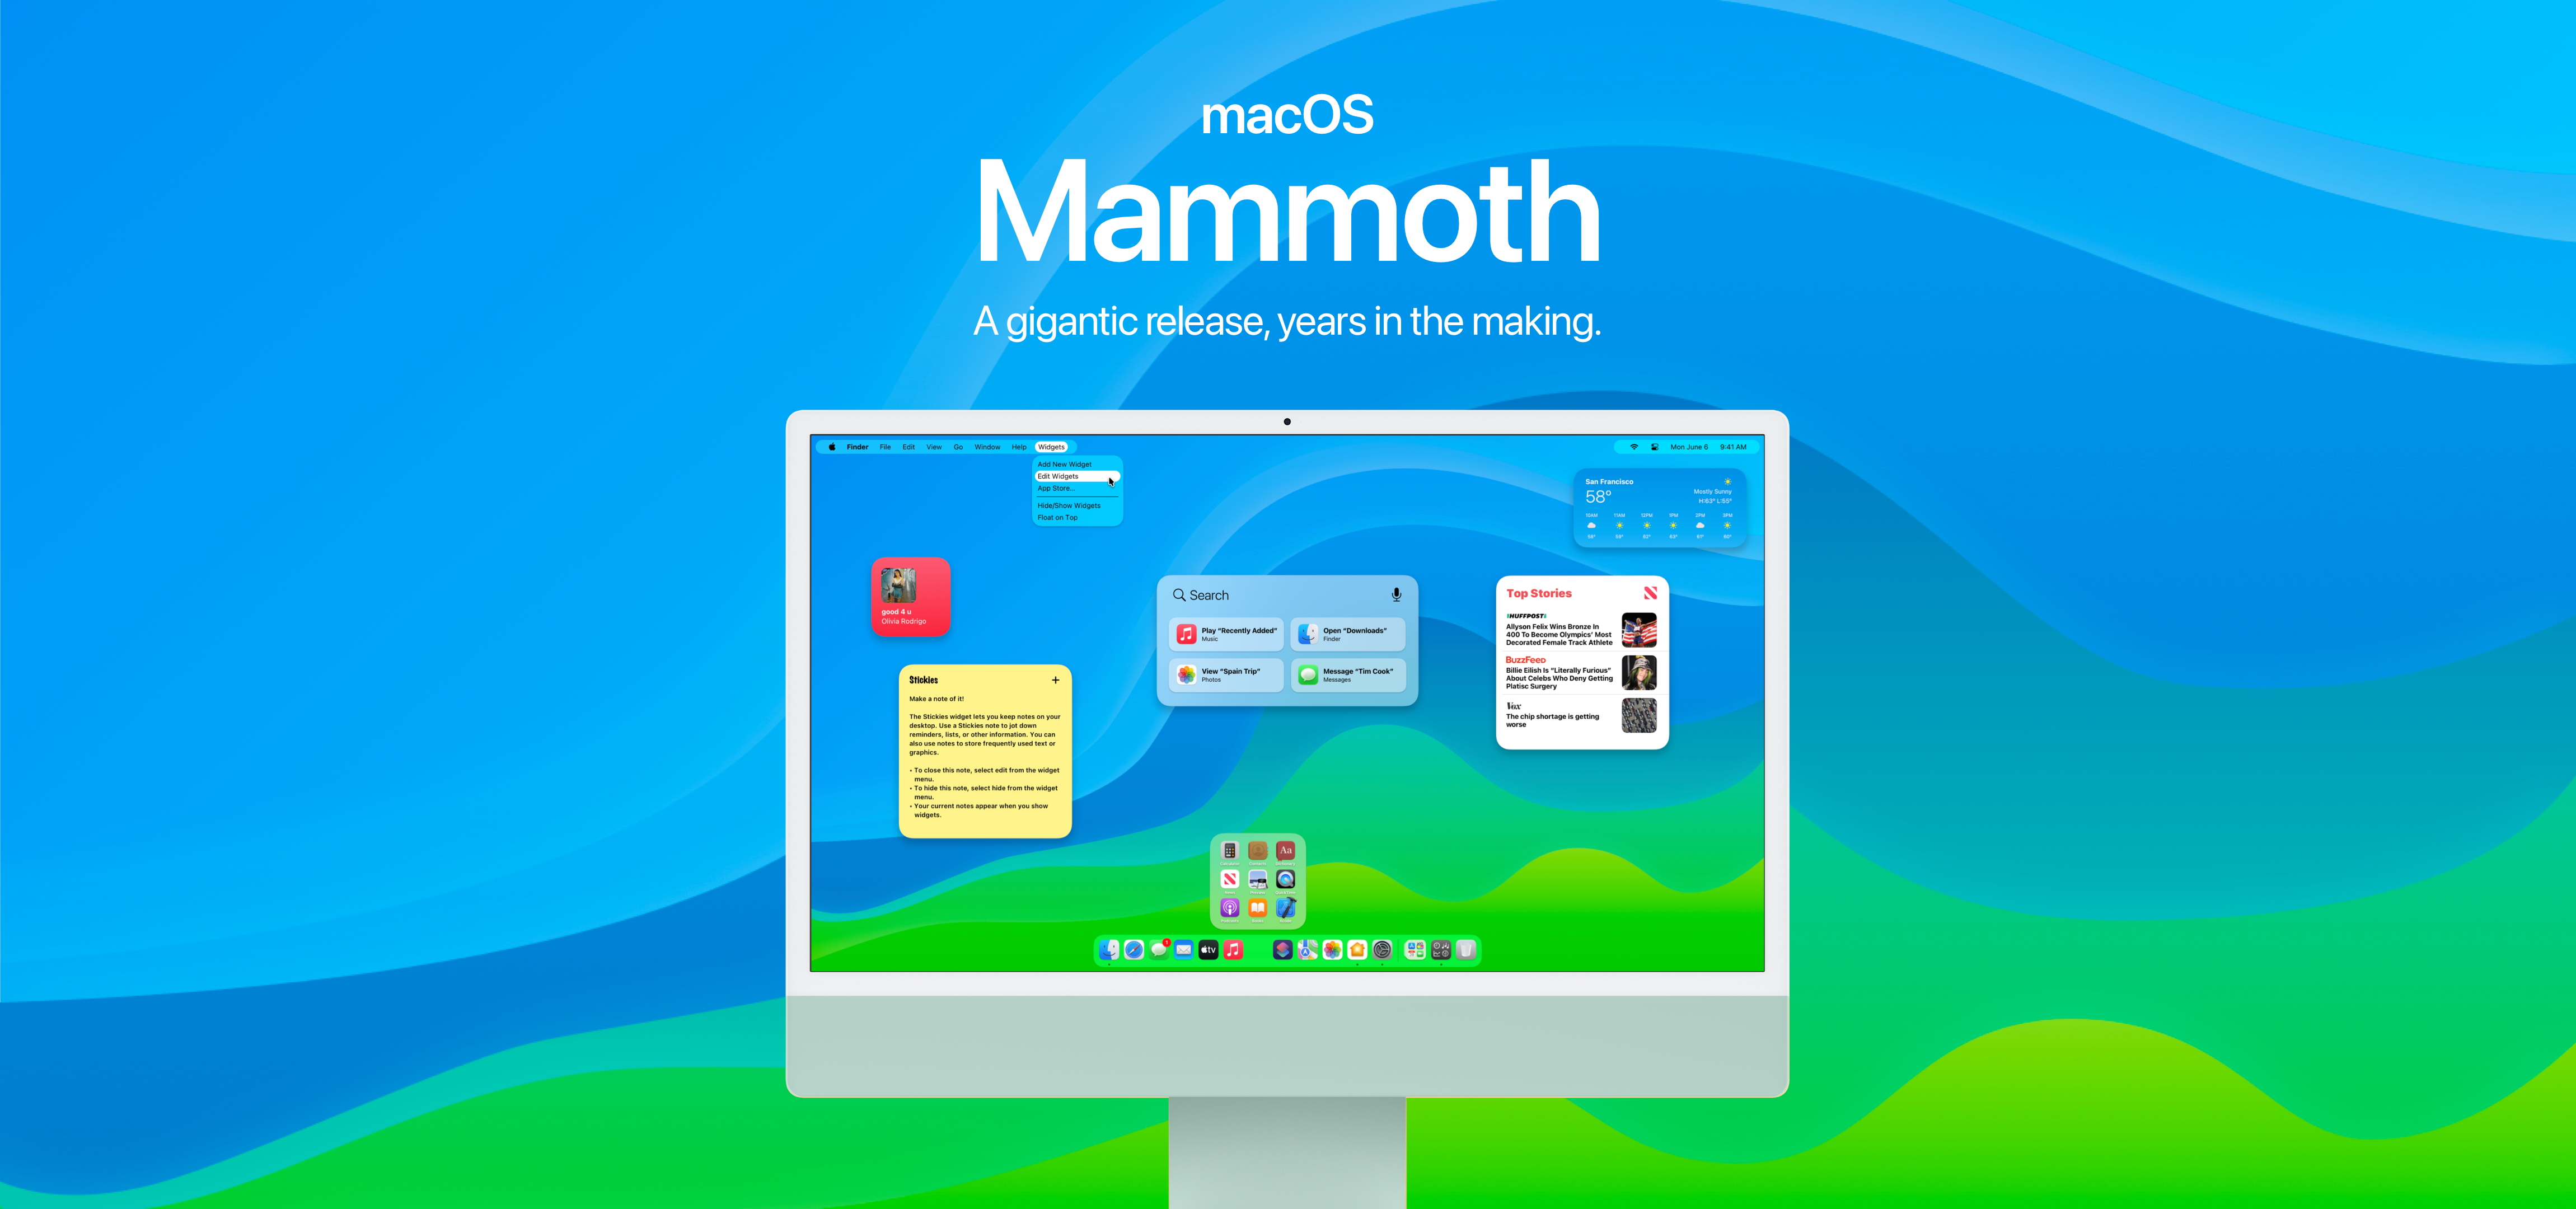 MacOS Mammoth by 9to5